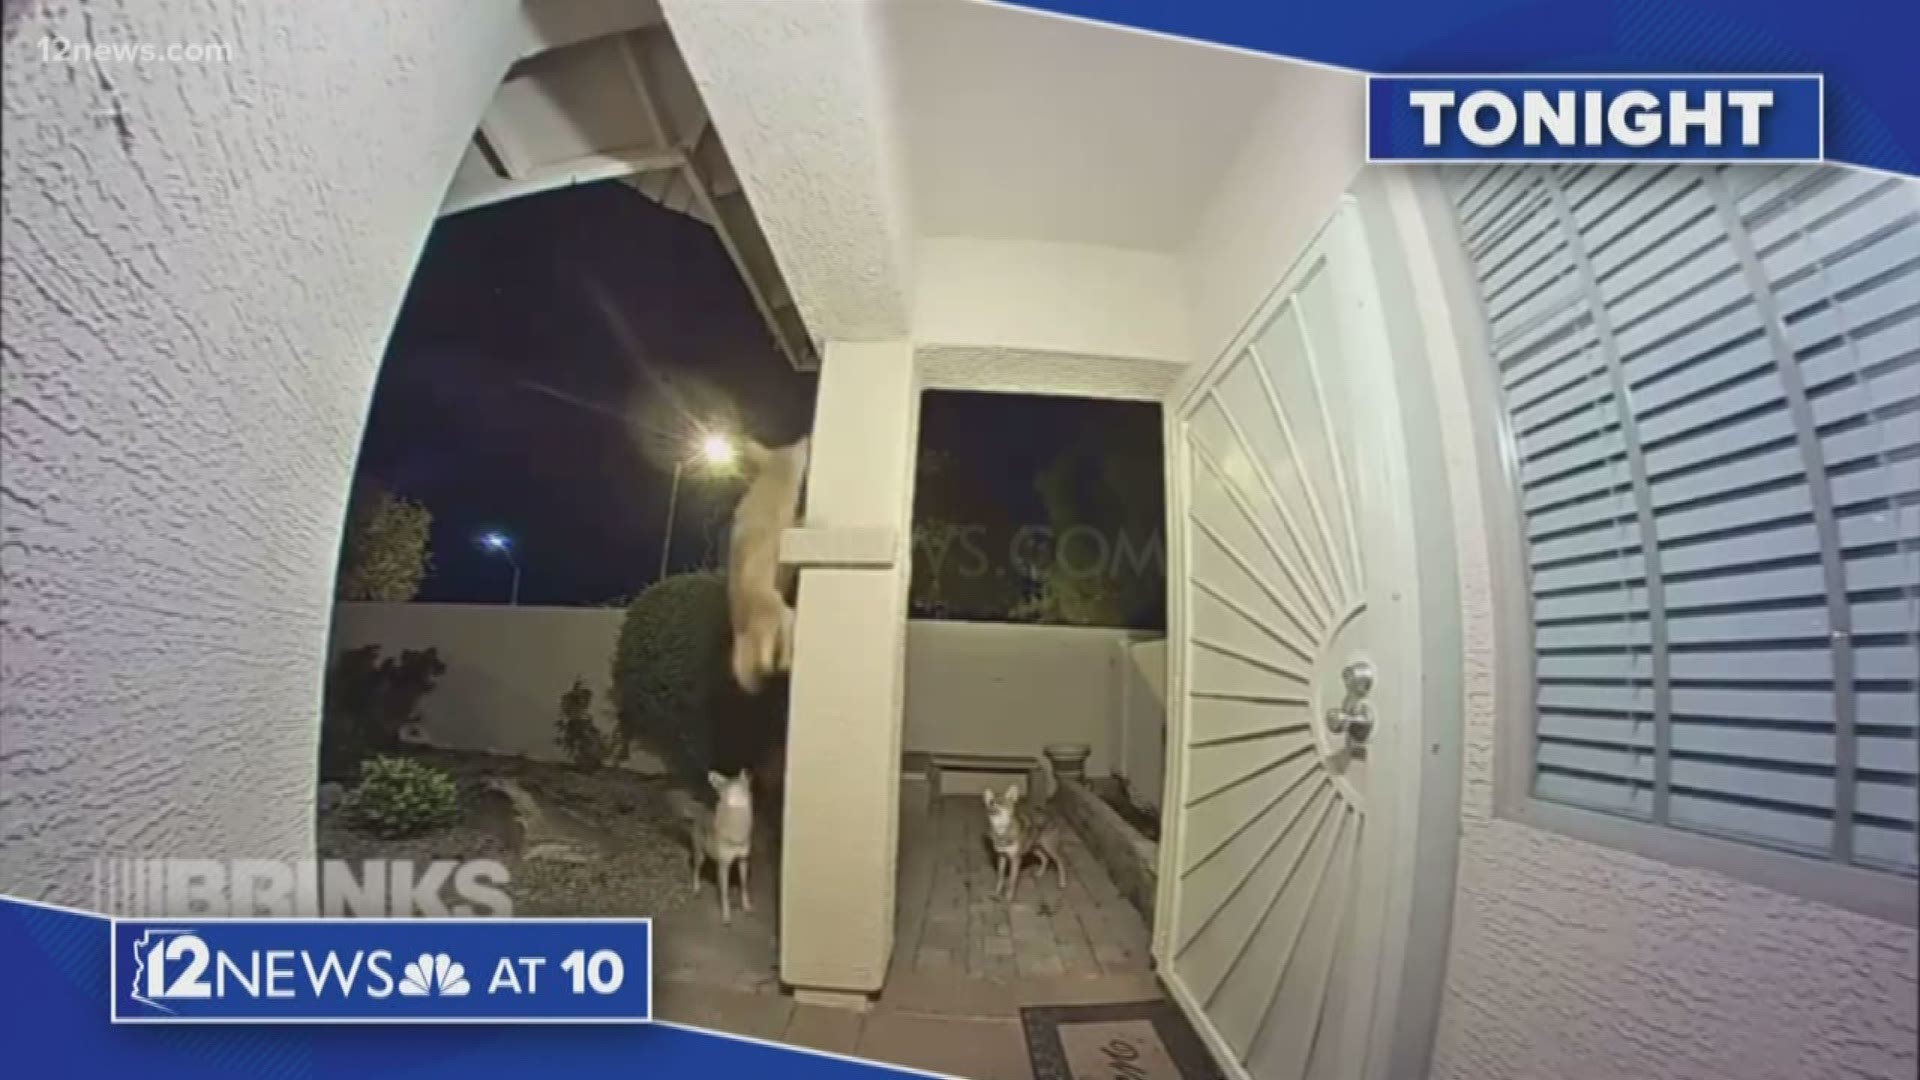 On 12 News at 10, Rachel Cole talks to pet owners in the neighborhood to see how they're protecting their pets.